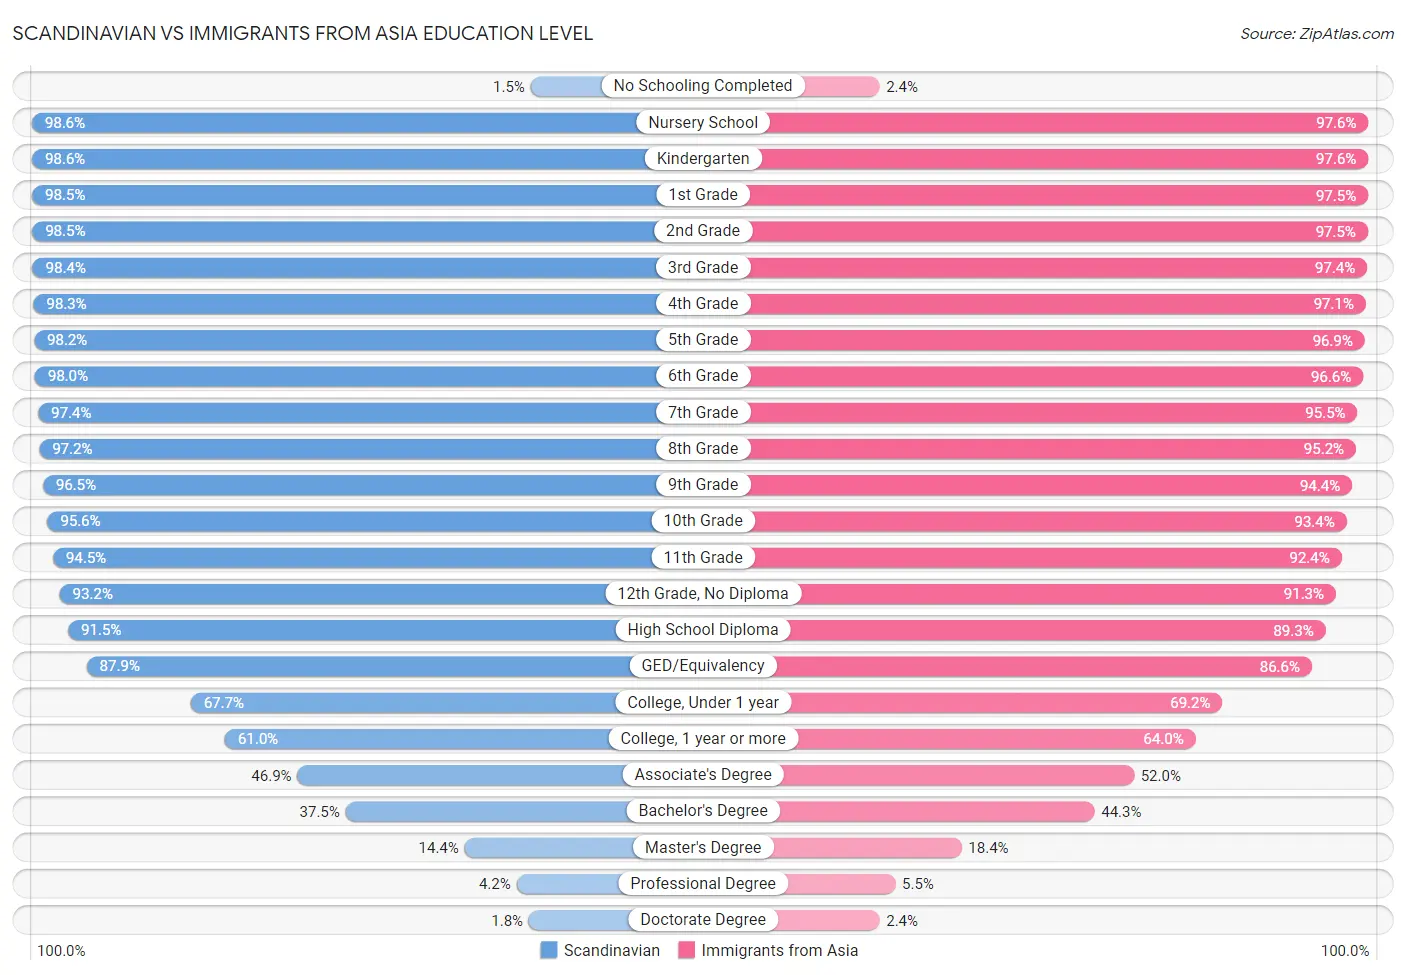 Scandinavian vs Immigrants from Asia Education Level